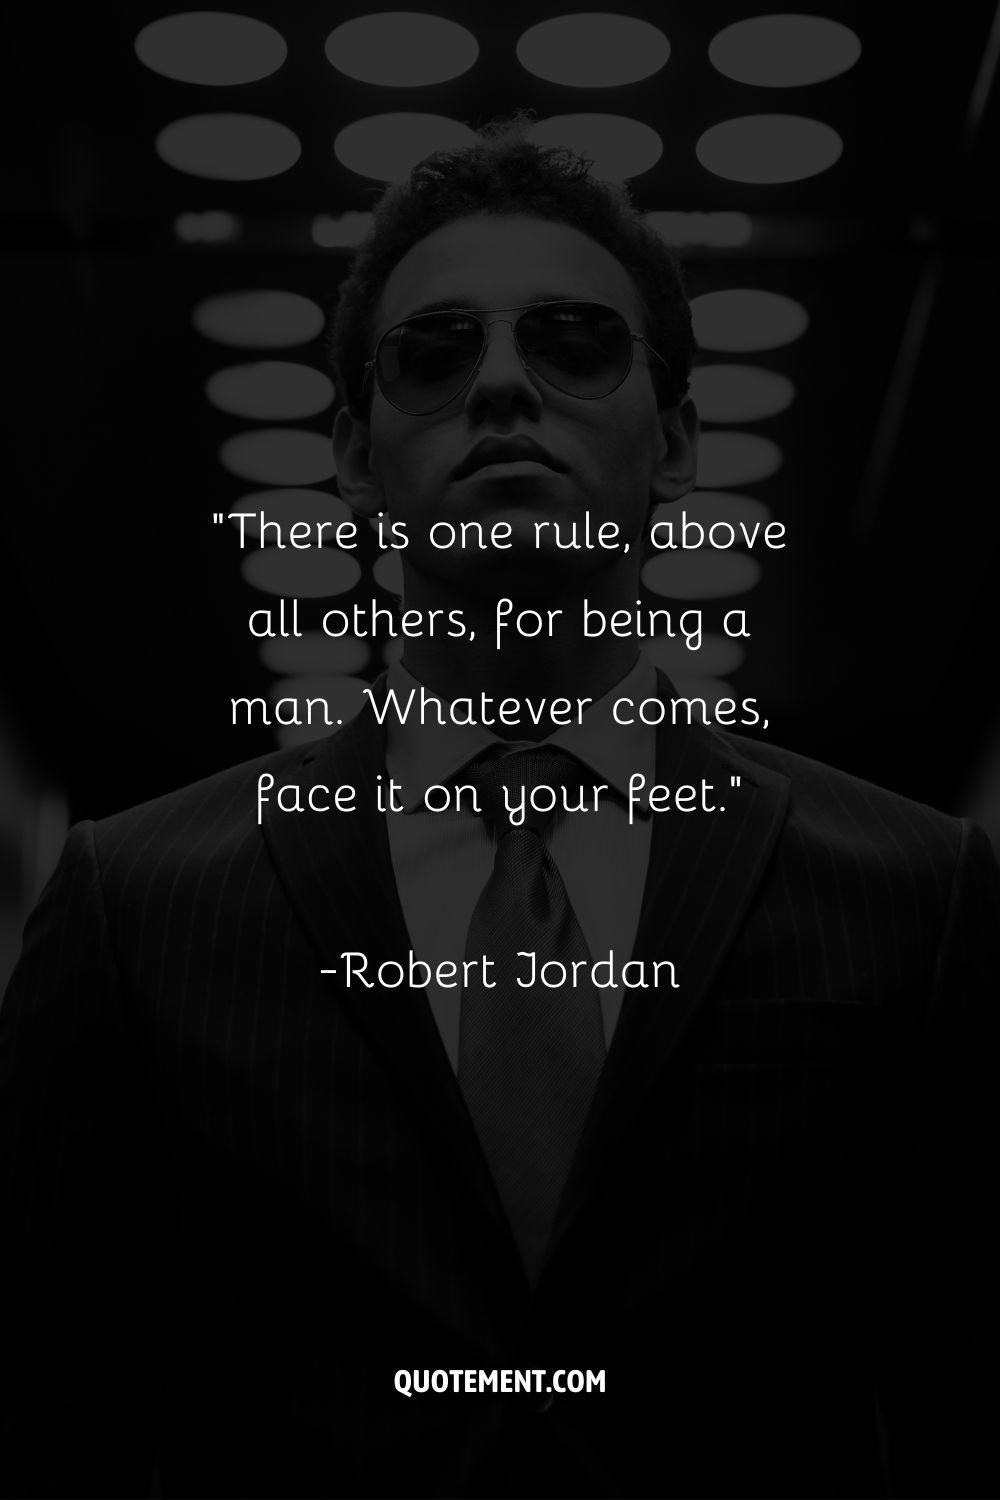 “There is one rule, above all others, for being a man. Whatever comes, face it on your feet.”